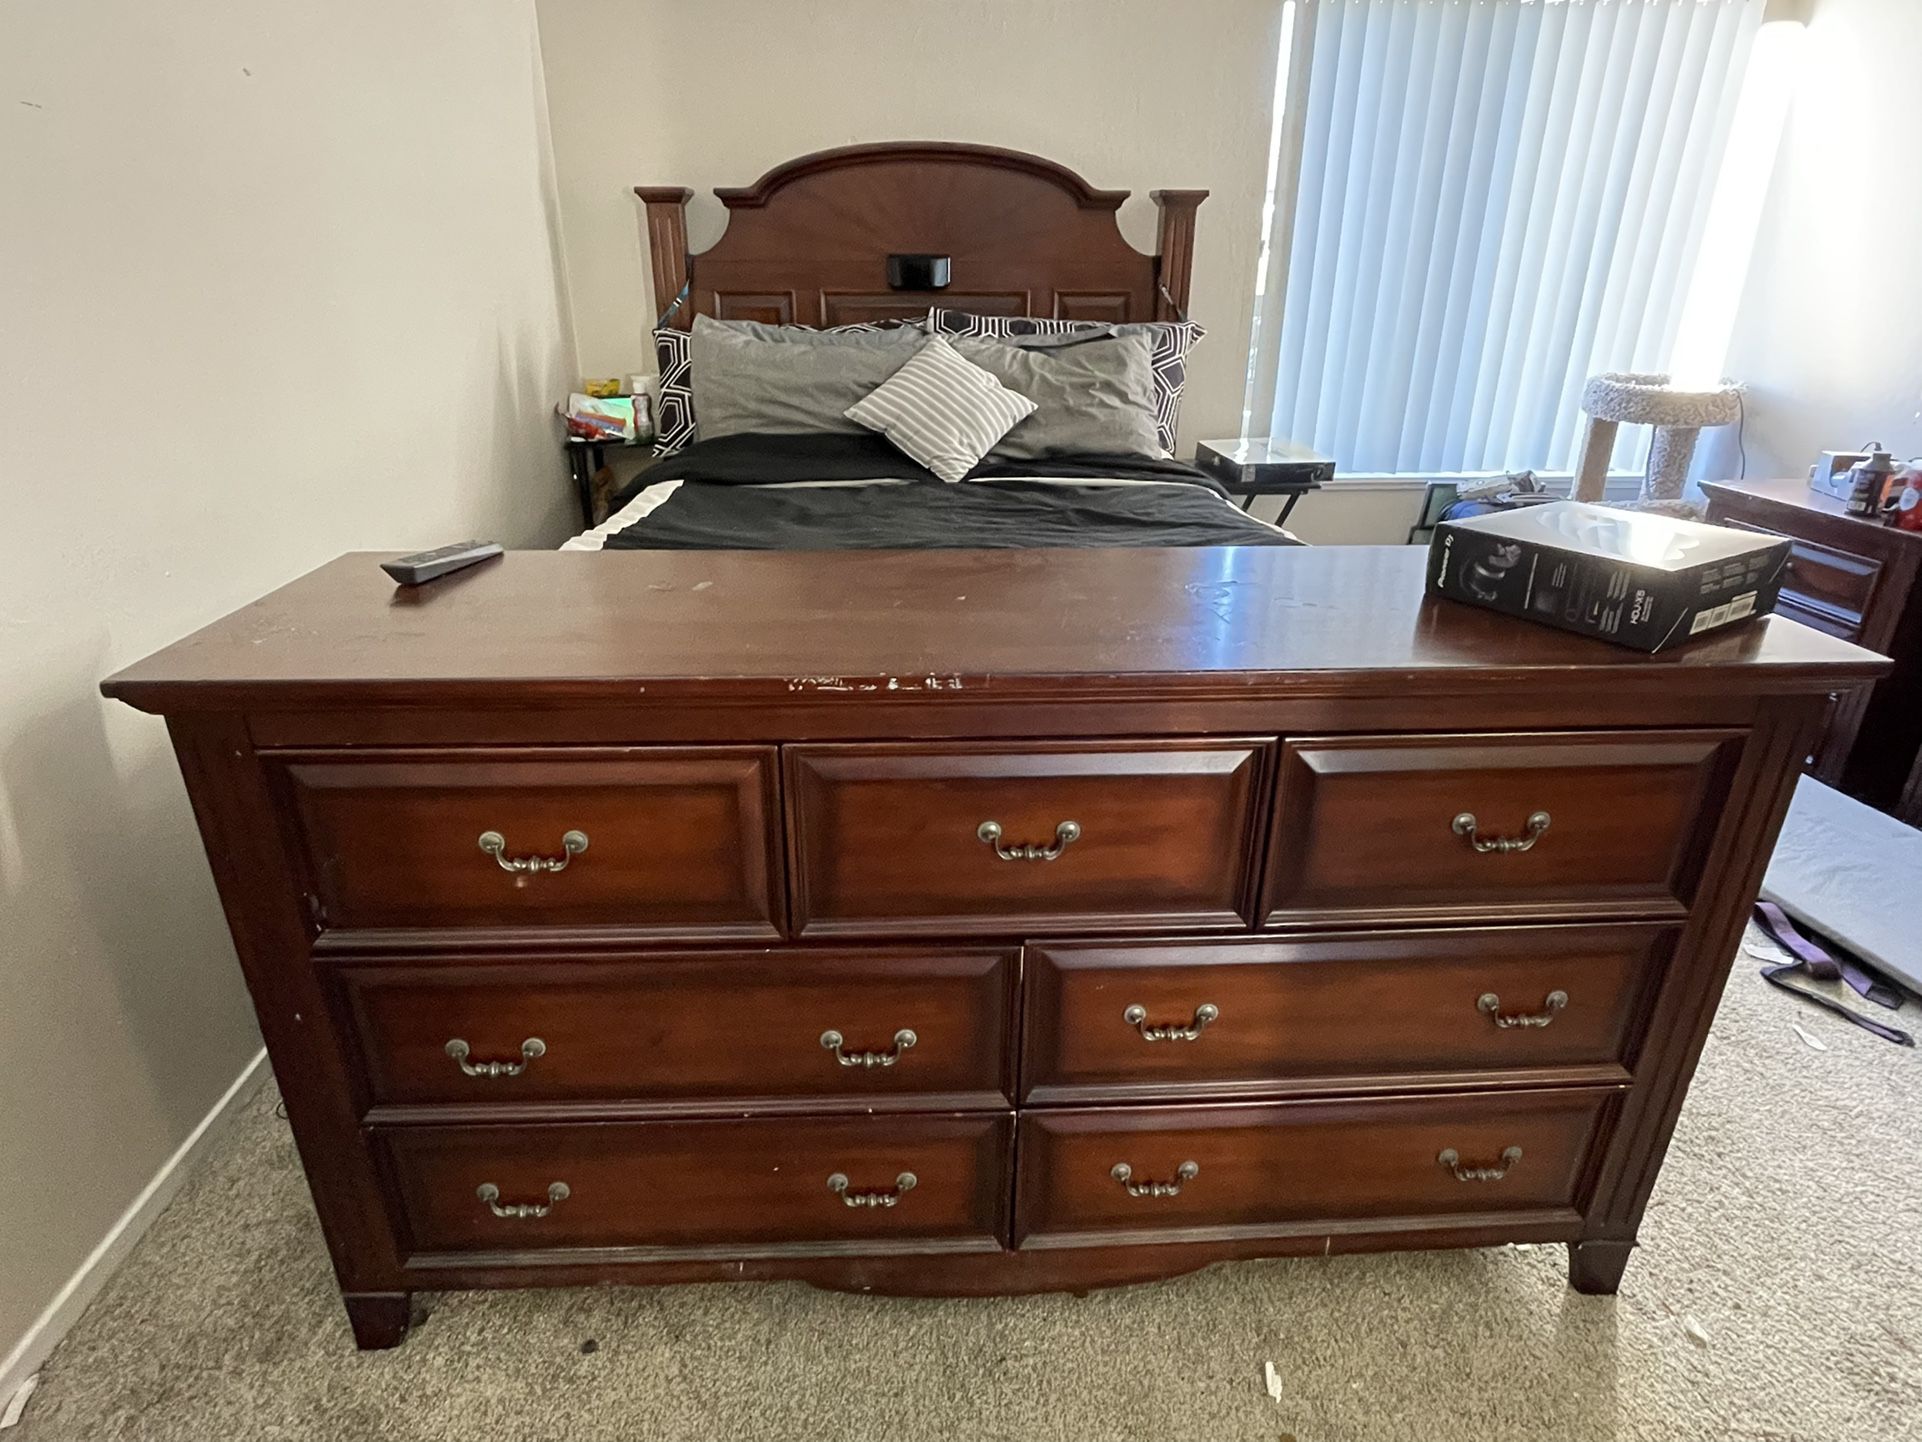 Queen bed frame And dressers